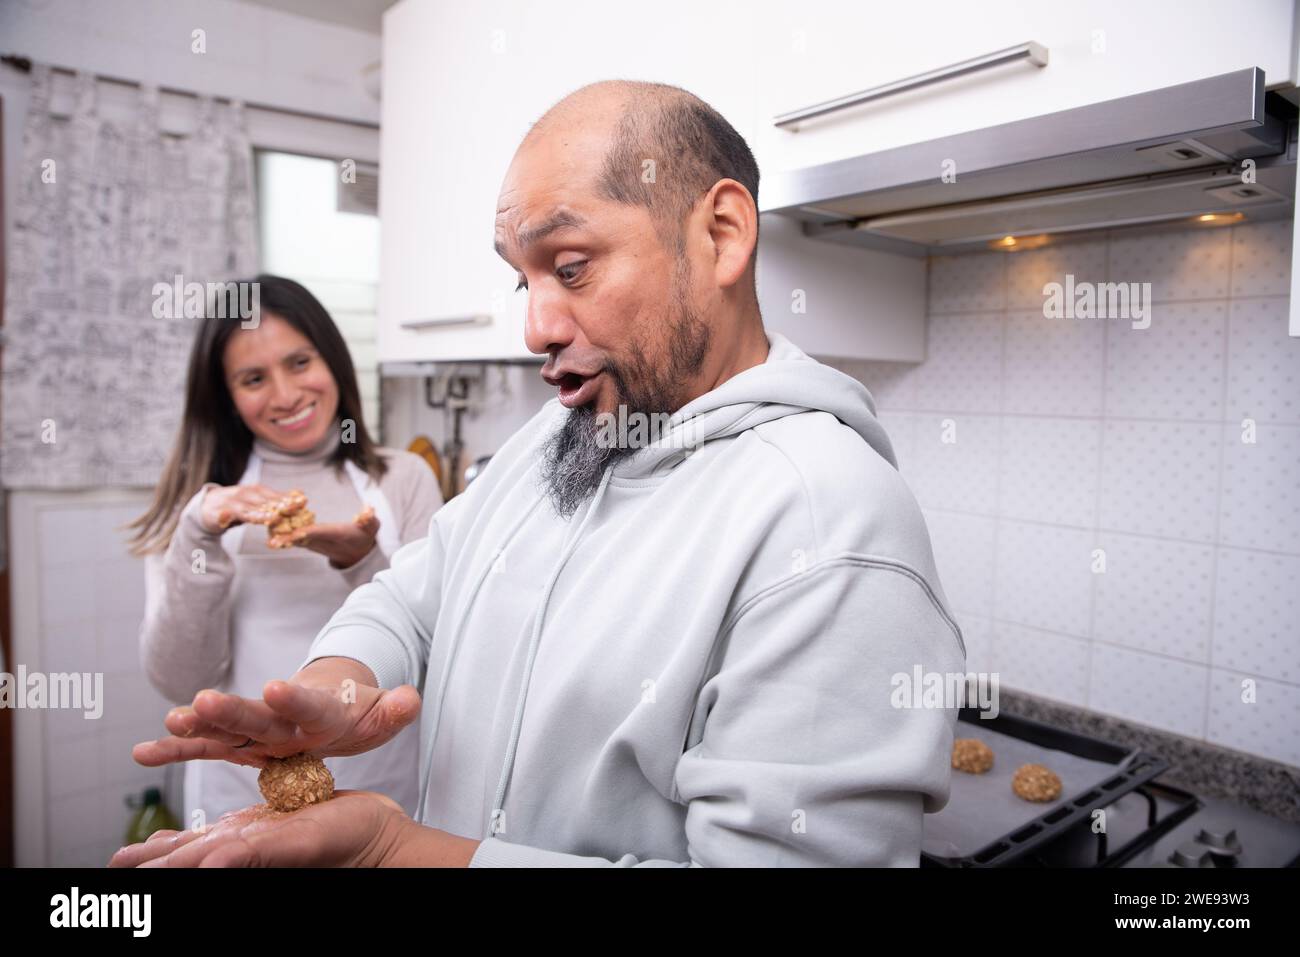 Man having fun with cookie dough prepared at home. Stock Photo